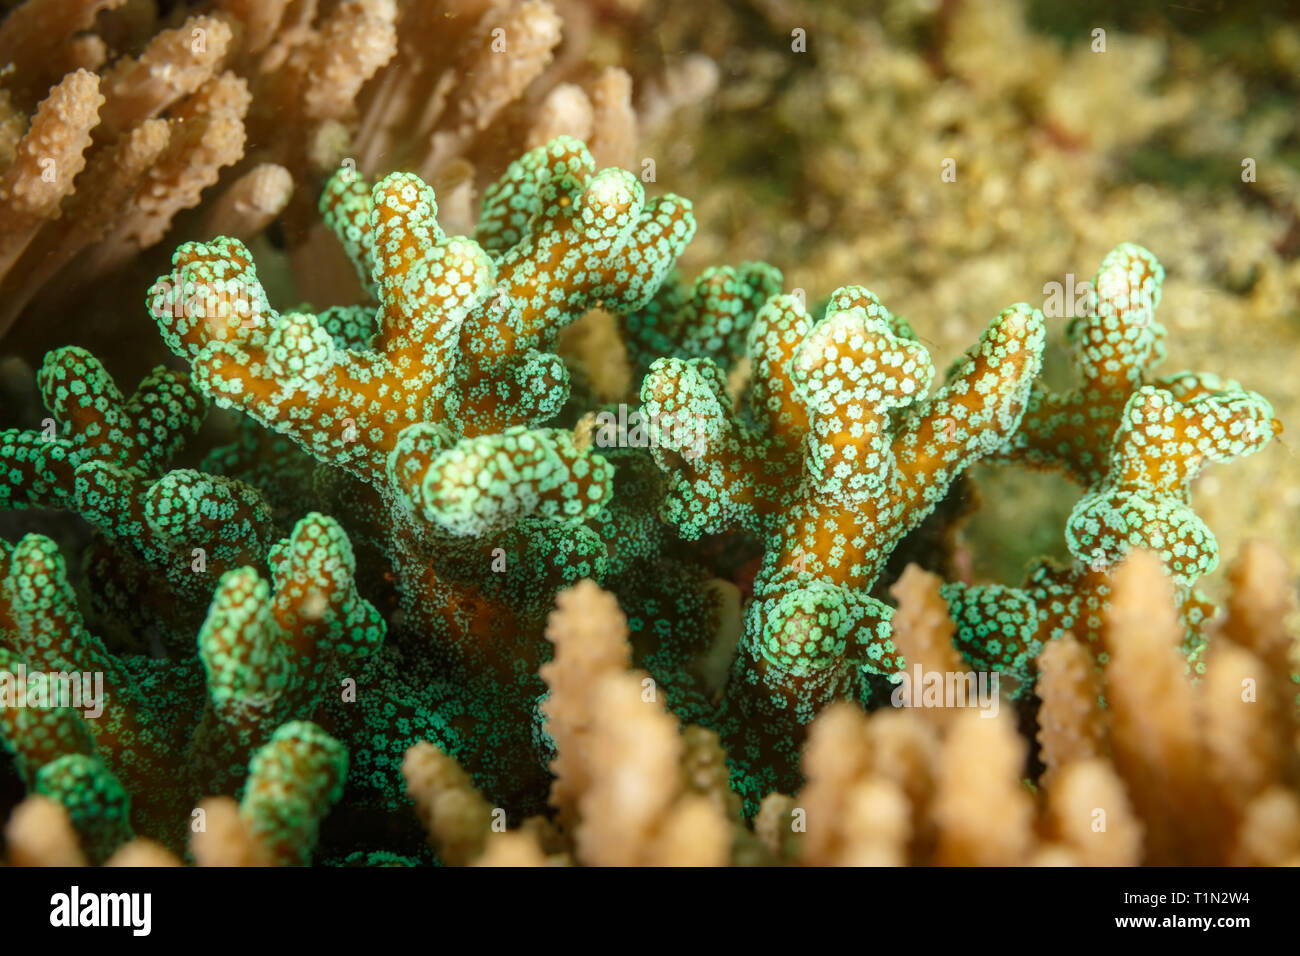 Closeup: Polyps glow green from algae on stag-horn, Acropora cervicornis, coral Stock Photo